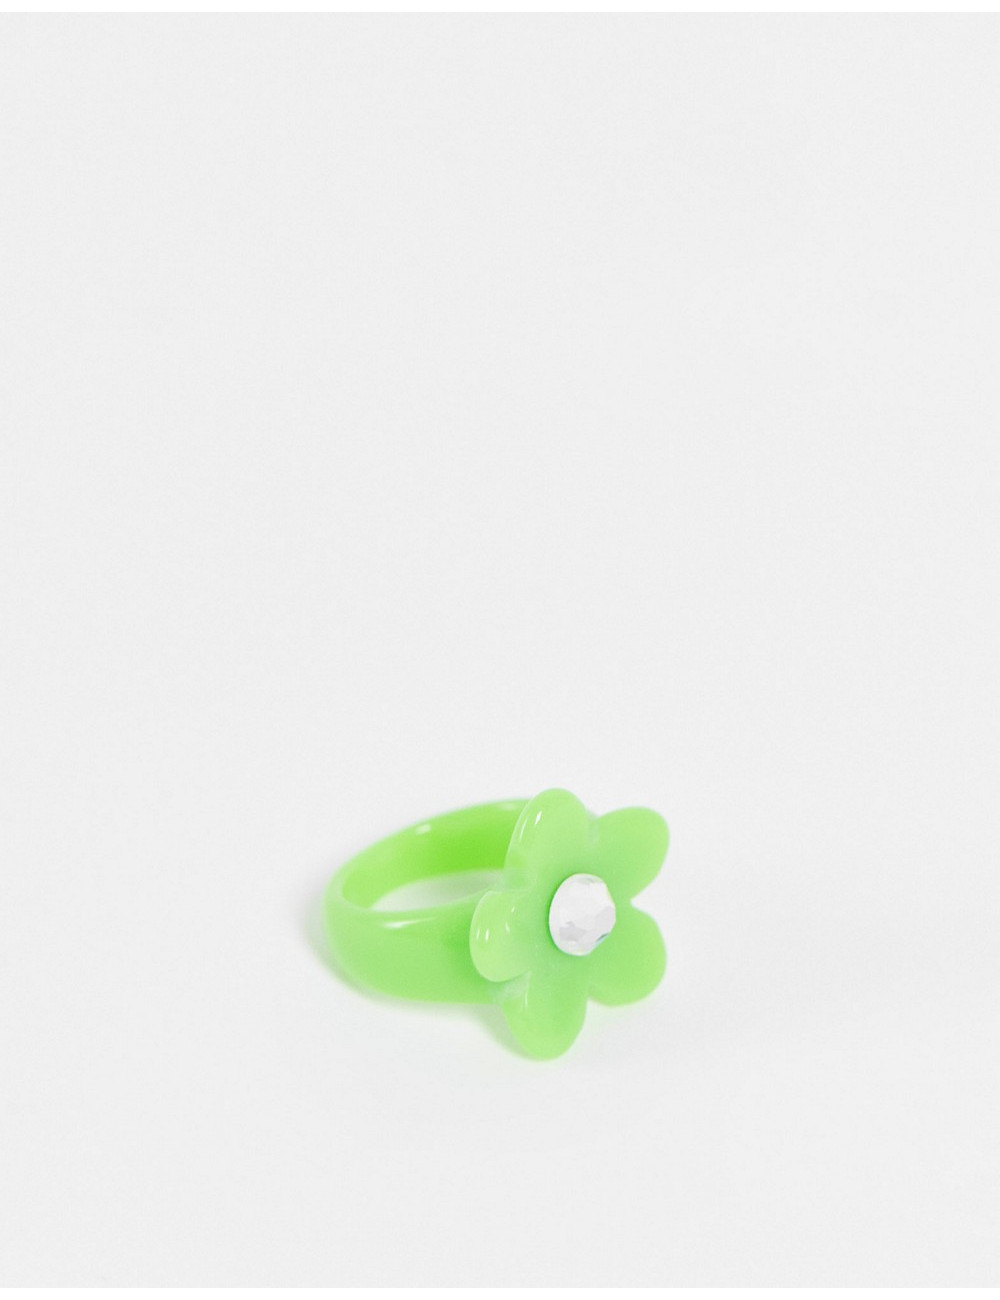 ASOS DESIGN ring with green...